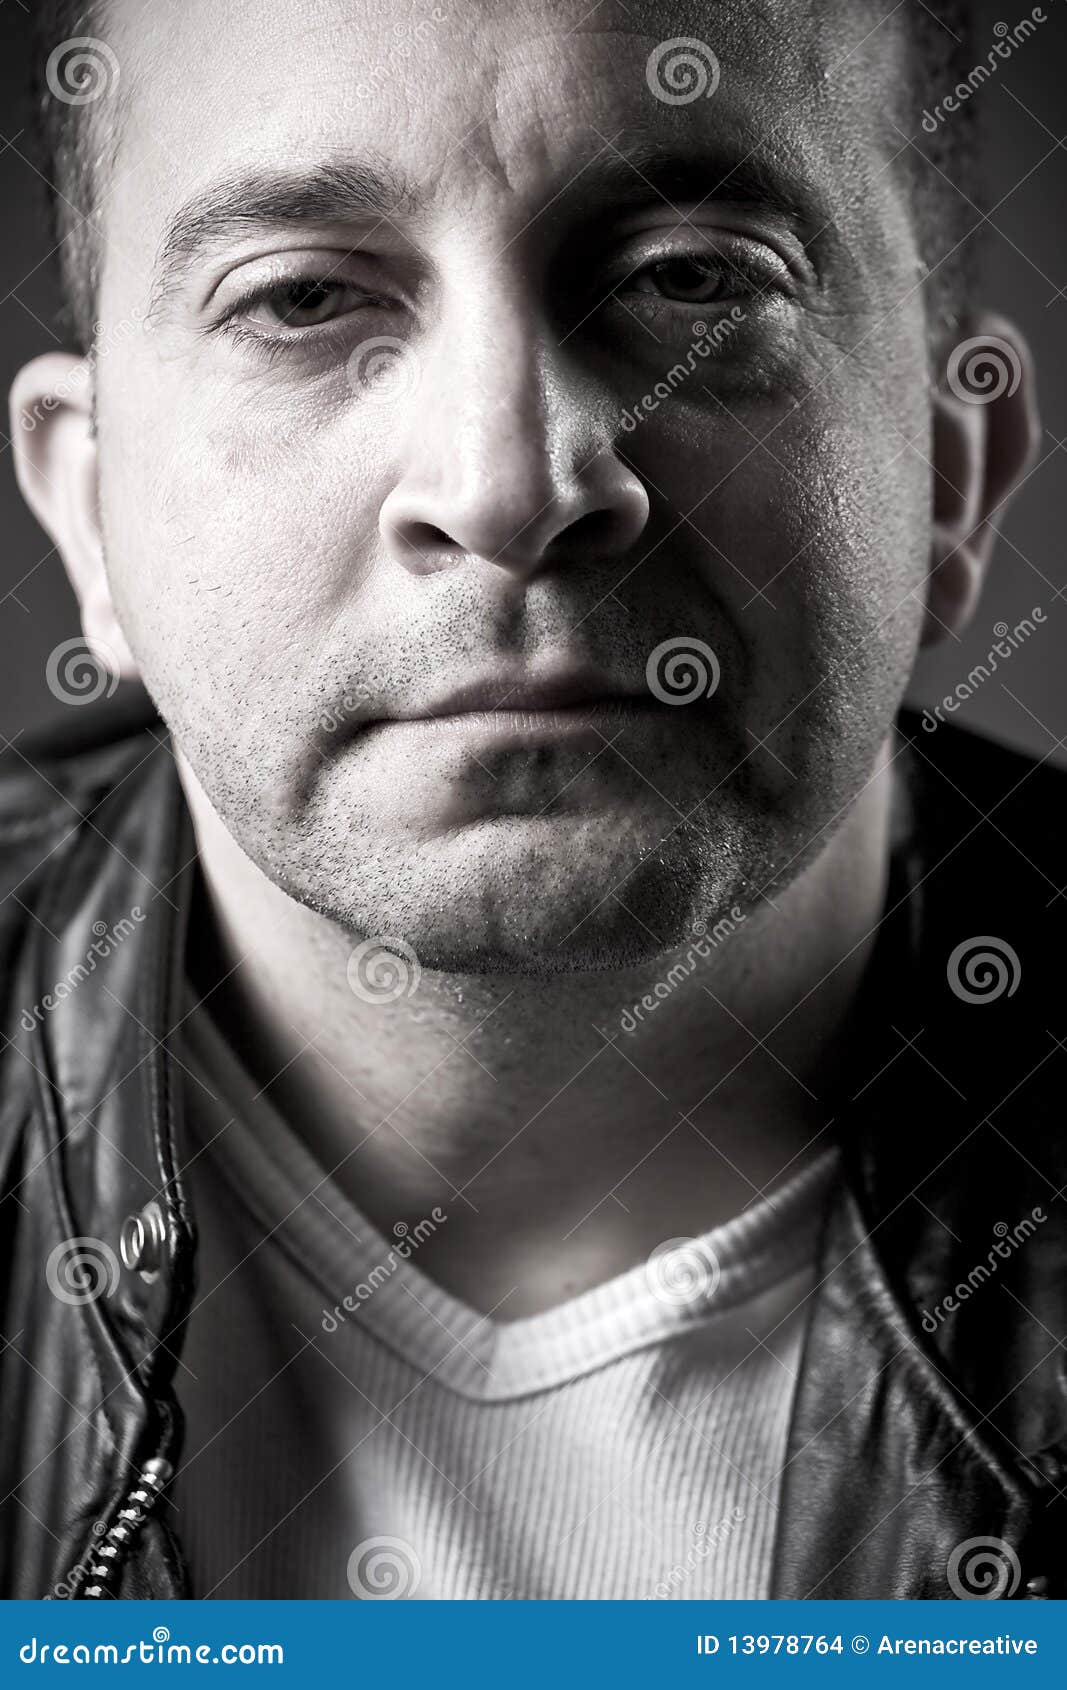 Serious Middle Aged Man stock photo. Image of black, criminal - 13978764